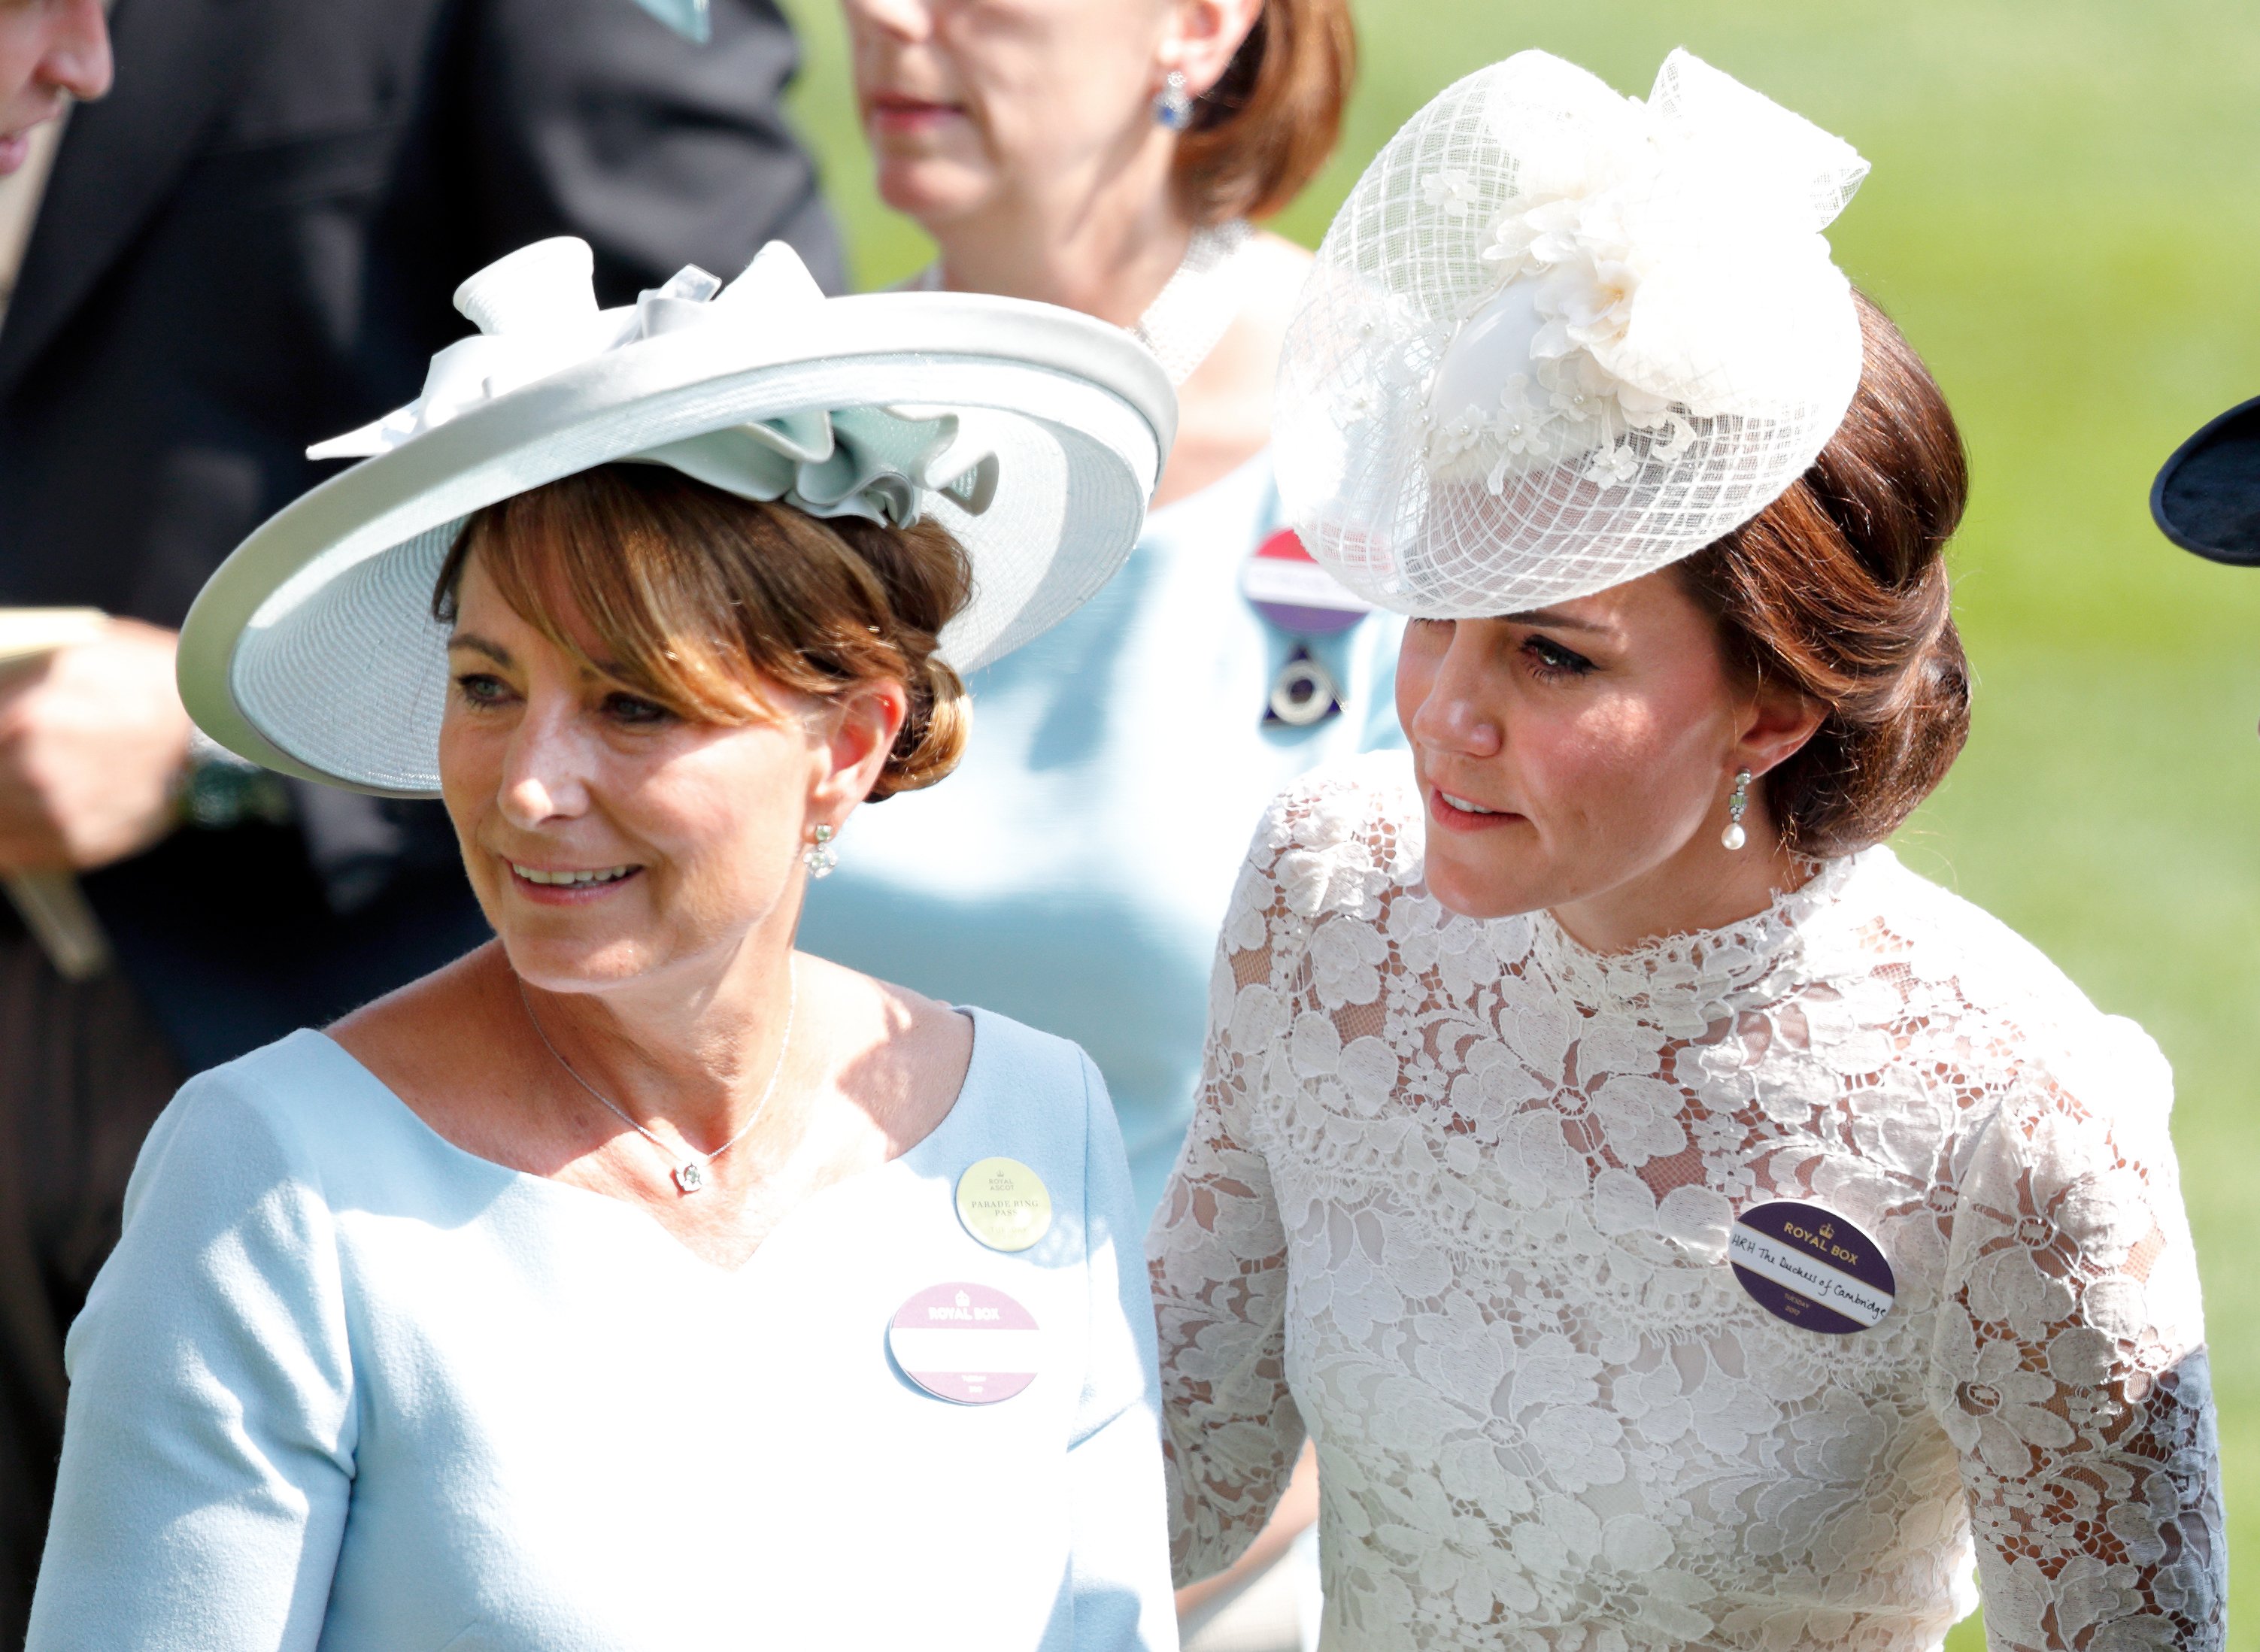 Carole Middleton and Catherine, Duchess of Cambridge attend day 1 of Royal Ascot at Ascot Racecourse on June 20, 2017, in Ascot, England. | Source: Getty Images